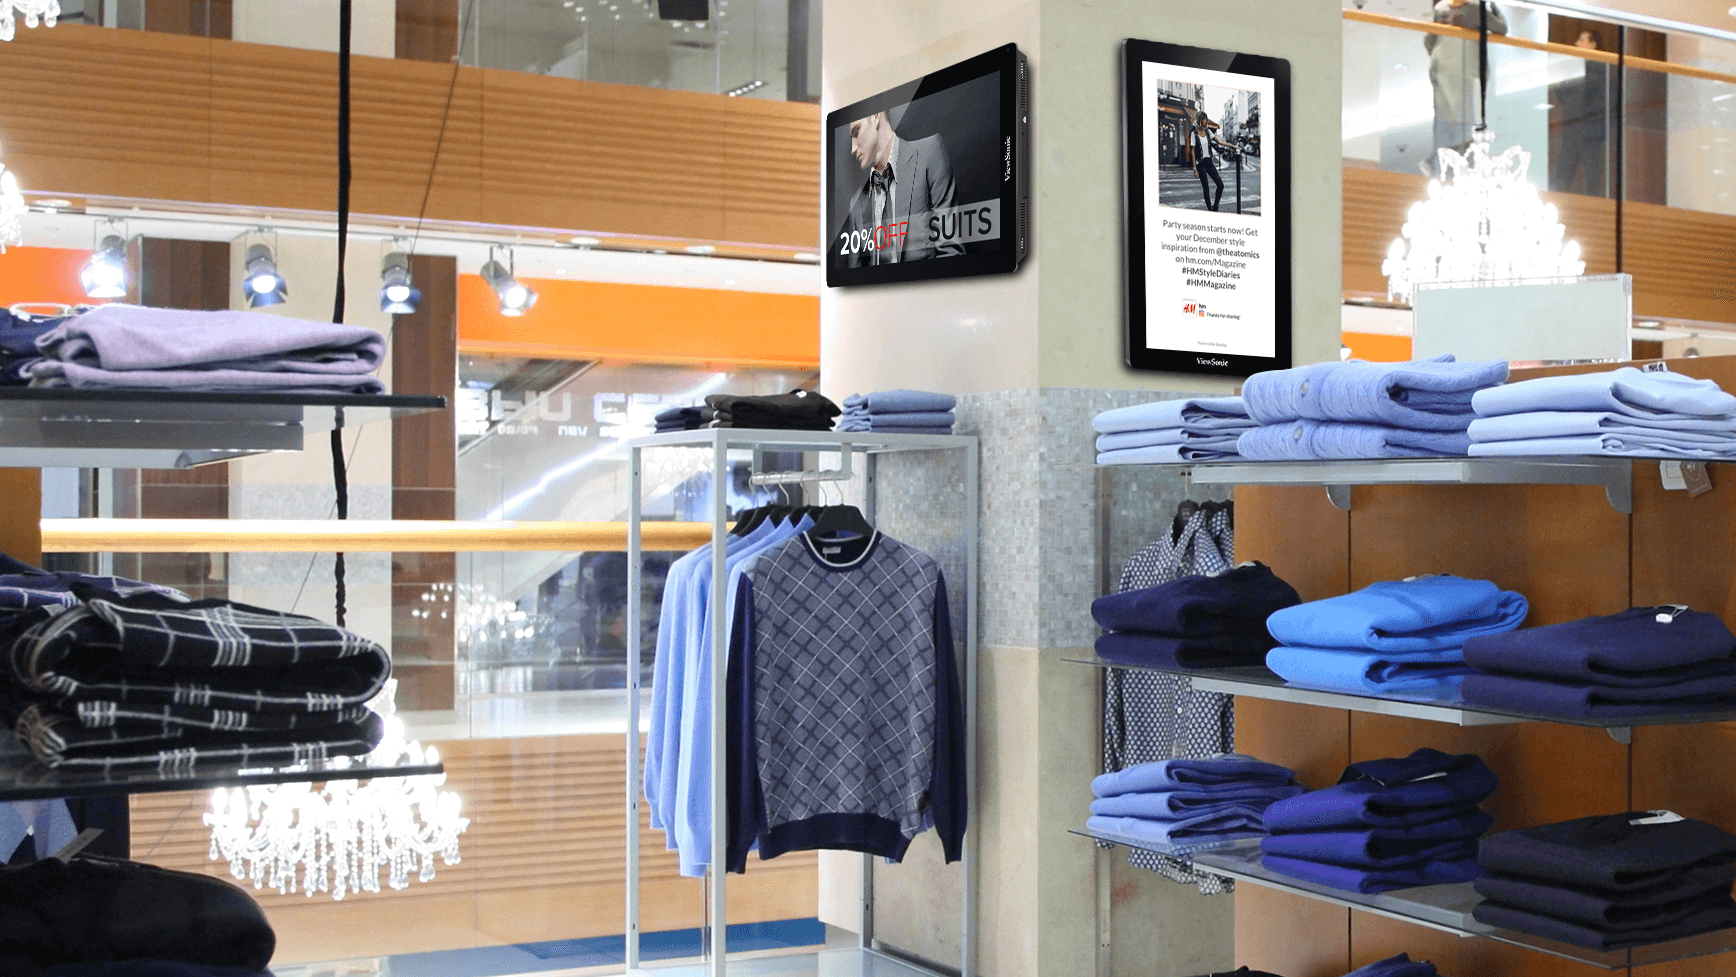 ViewSonic displays with Enplug's signage software showing a social media wall and a promotion in a retail clothing store.